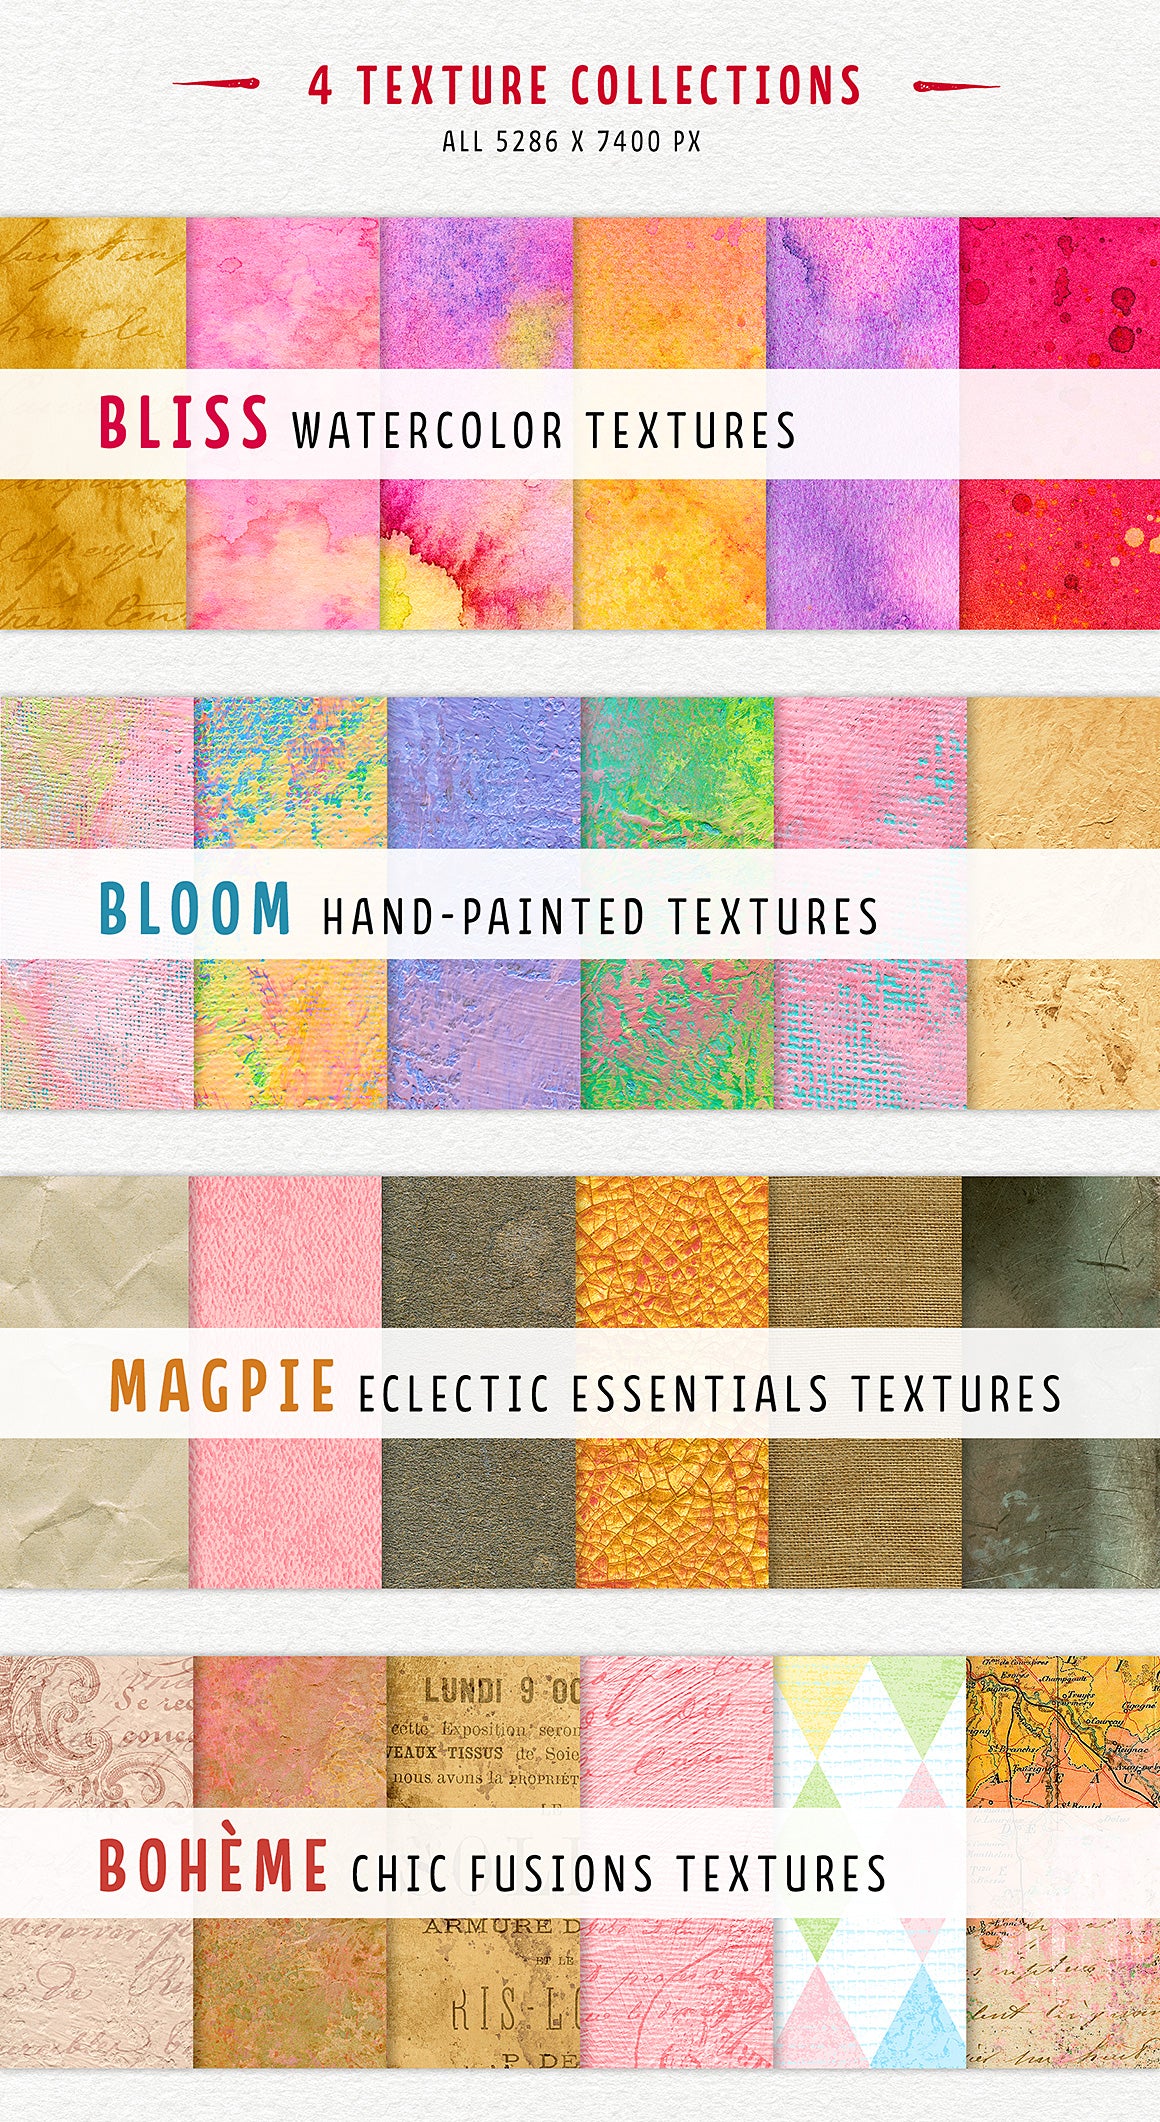 The 4 texture collections in The Complete Inspirational Textures and Elements Collection.